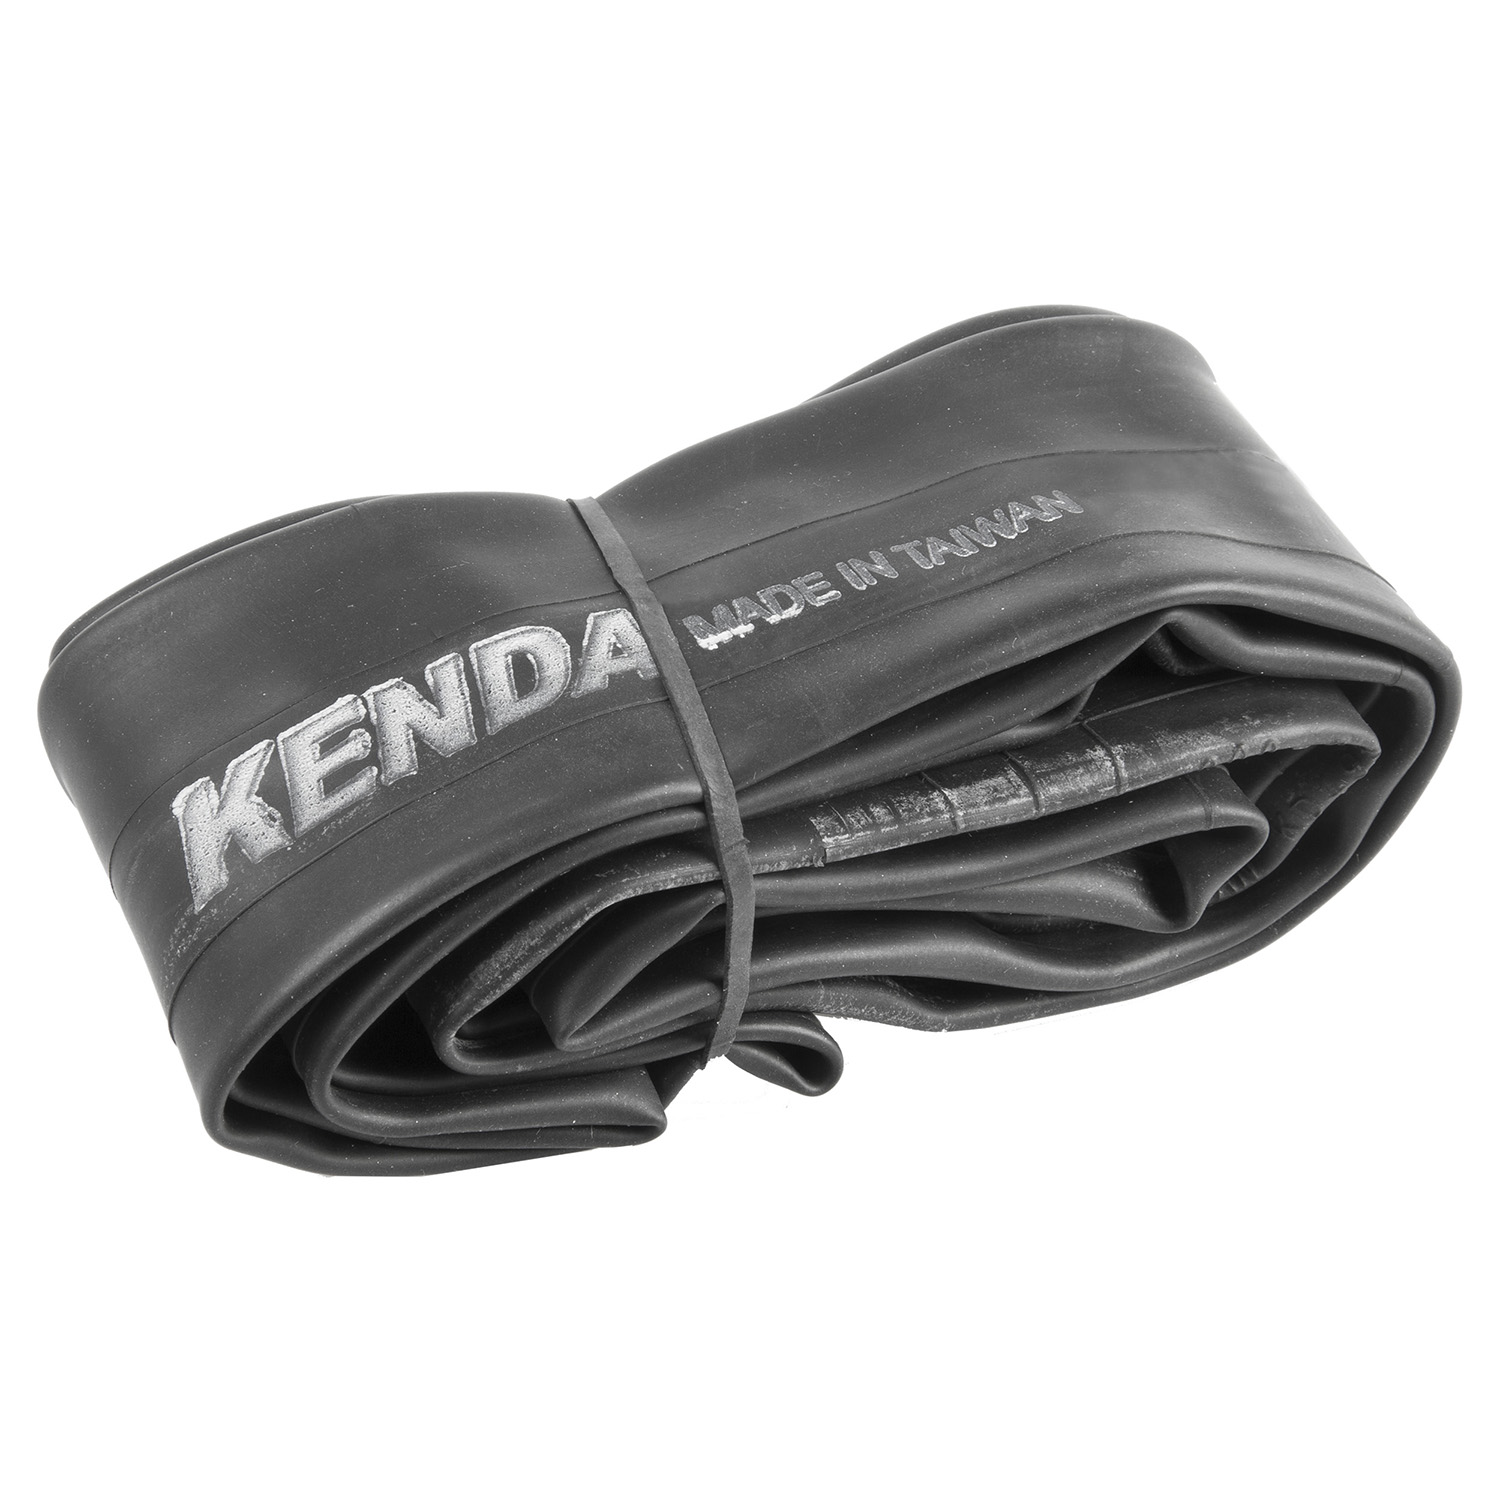 516003 KENDA 29 x 2.40 – 2.80″ bicycle tube – AVAILABLE IN SELECTED BIKE SHOPS